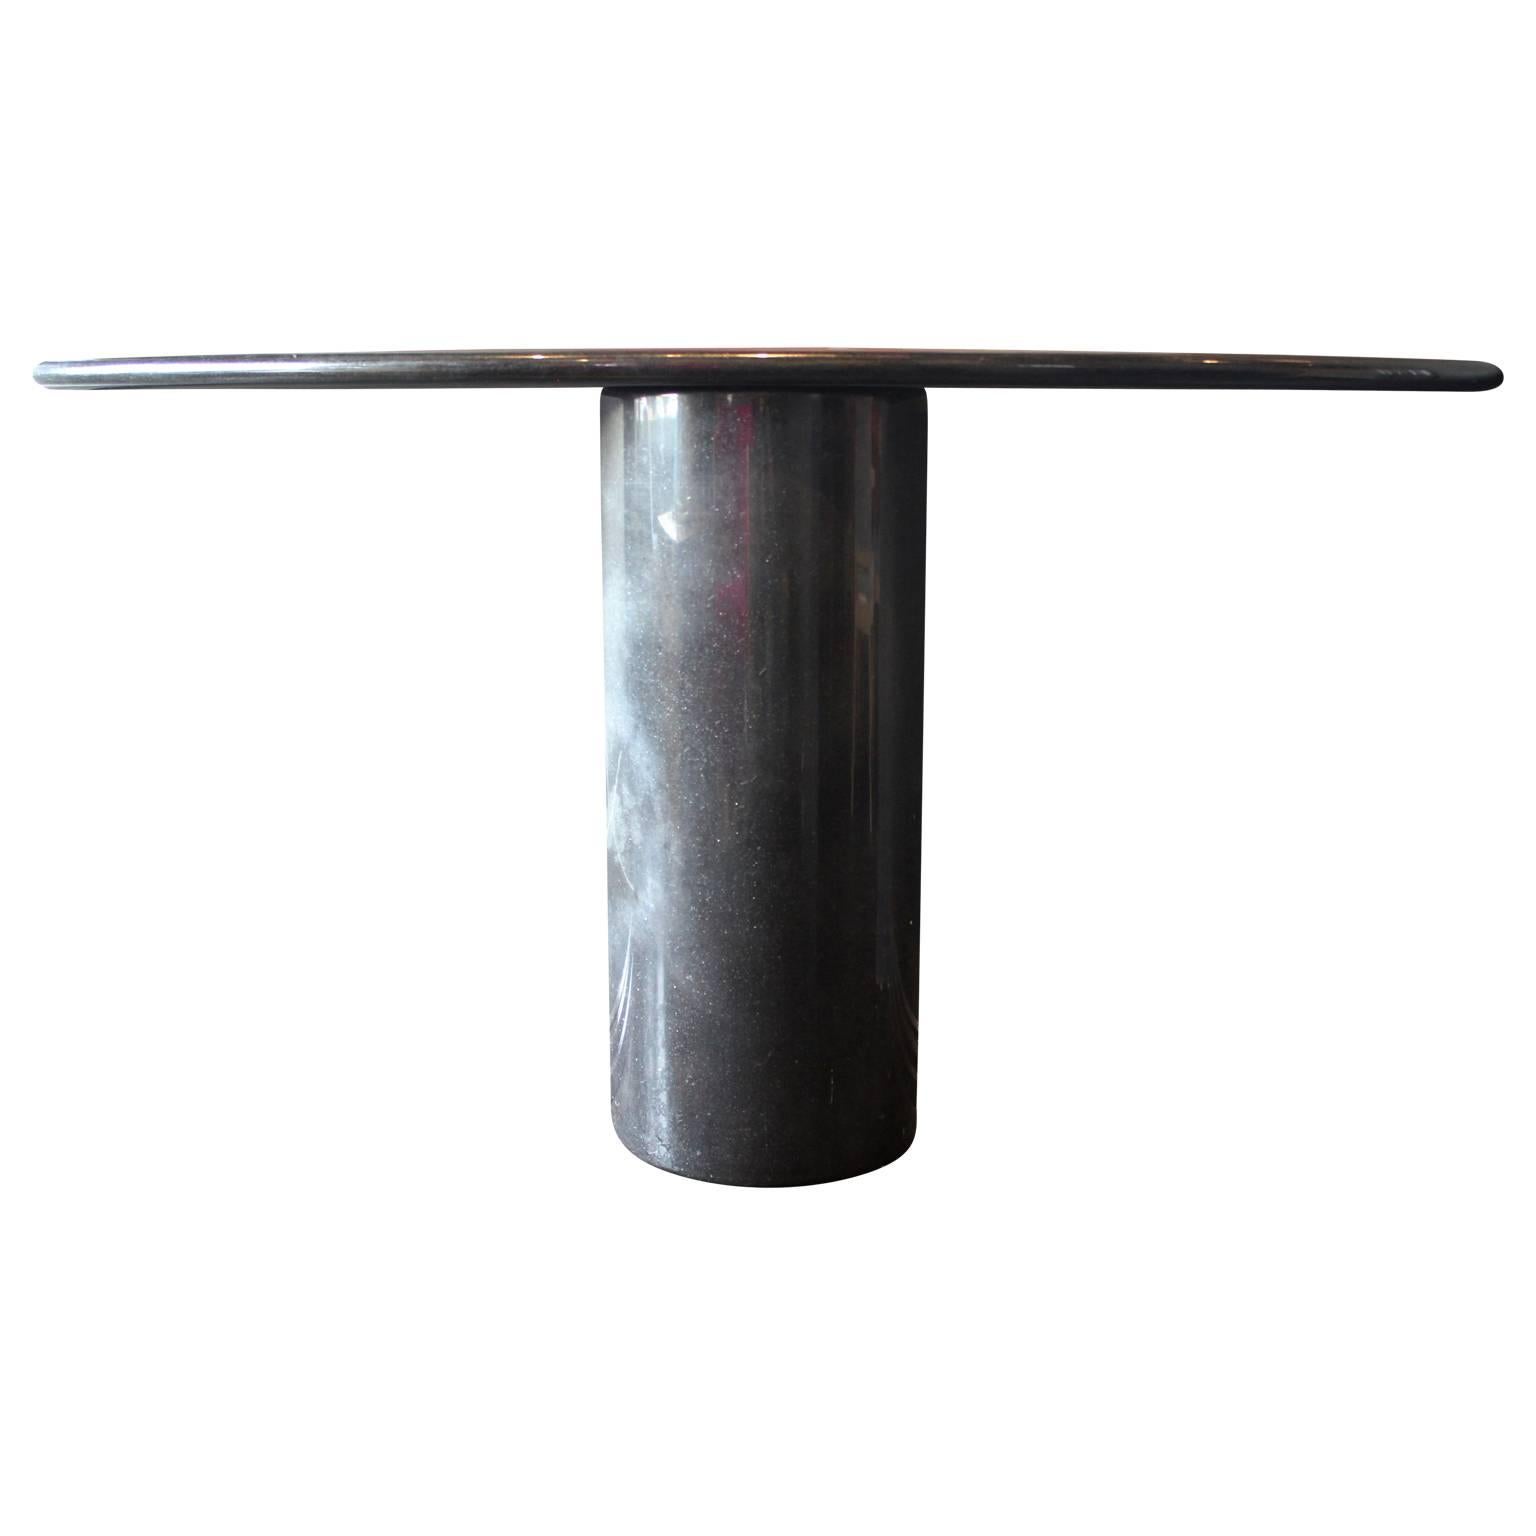 Gorgeous modern Italian demilune console/entryway pedestal table made out of black / dark grey marble. Absolutely stunning in person. There is a variation in the base that makes a line but is structurally sound and does not appear to be a